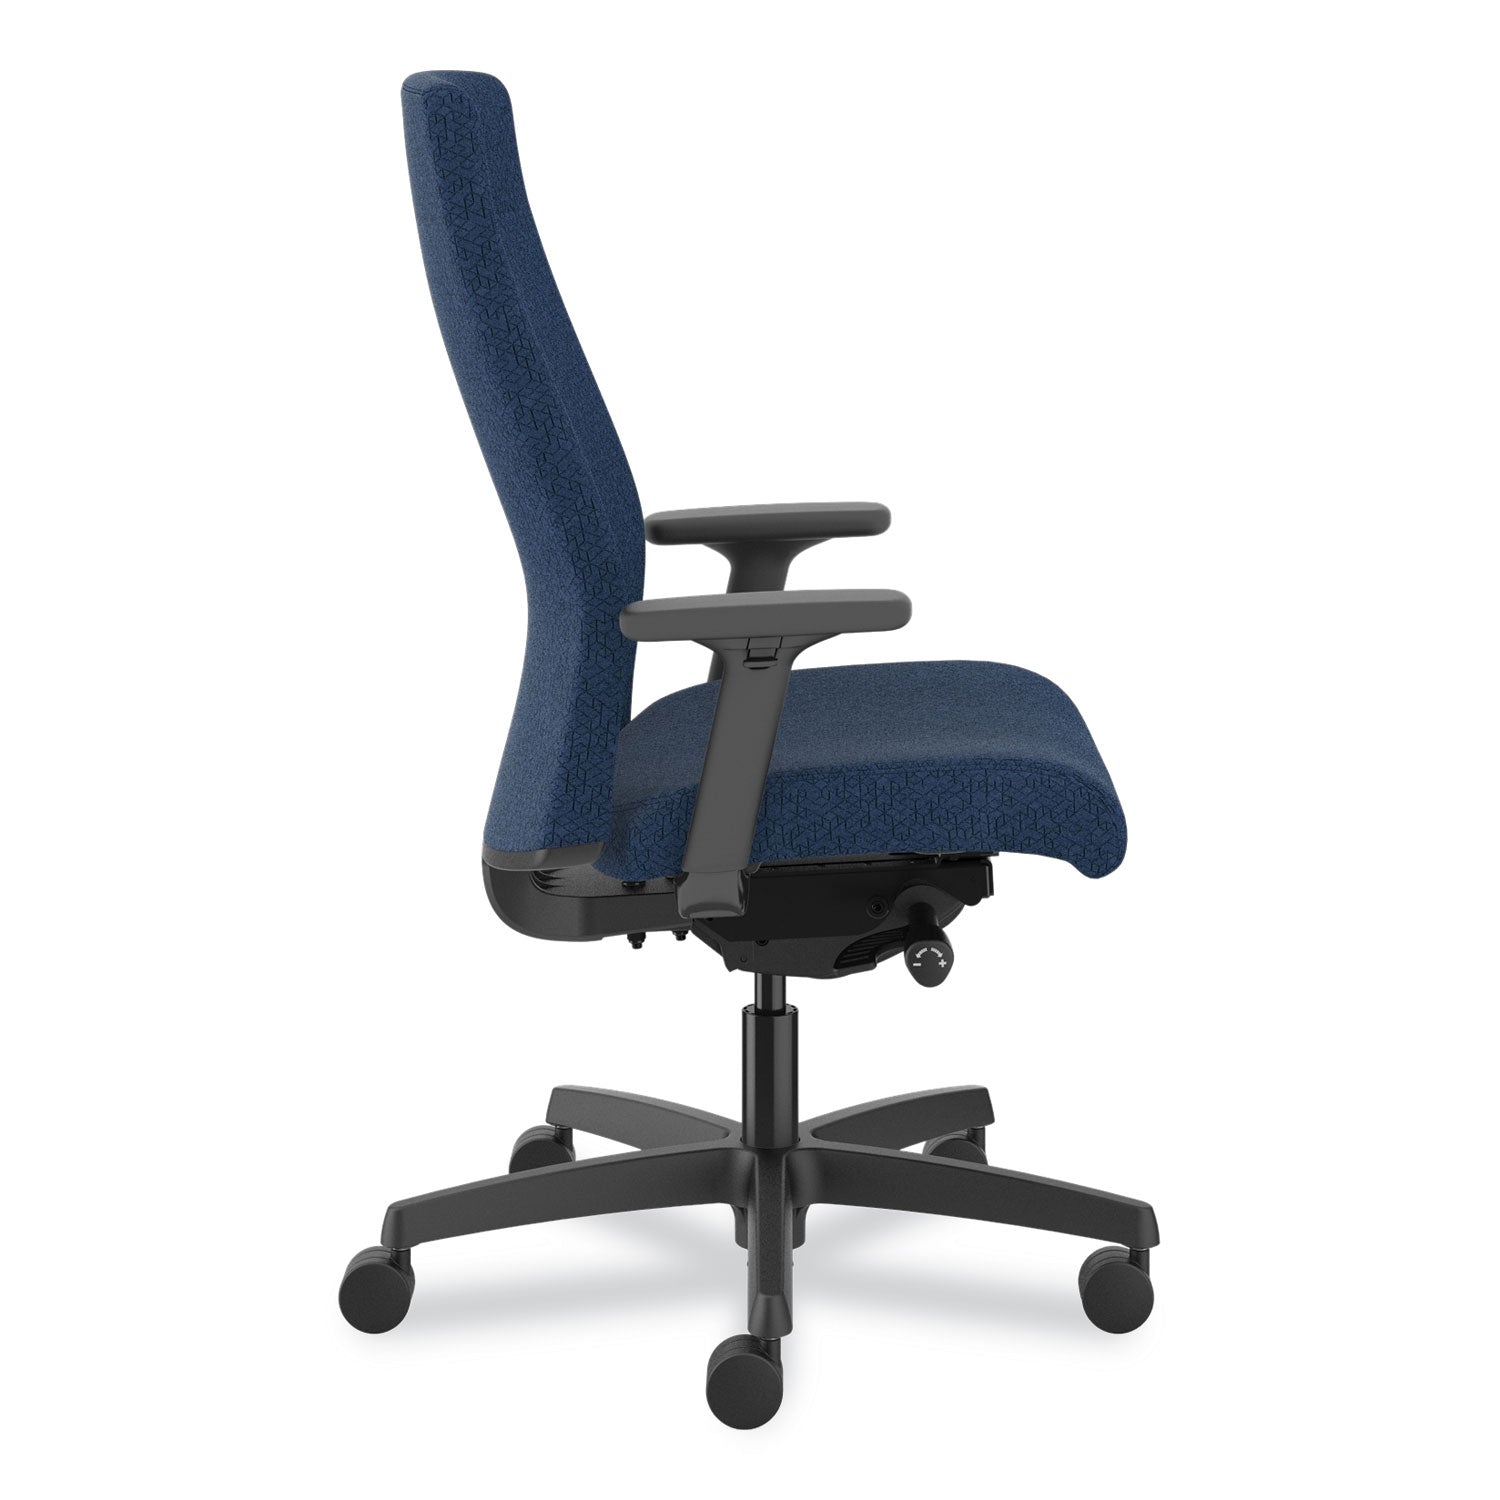 ignition-20-upholstered-mid-back-task-chair-17-to-215-seat-height-navy-fabric-seat-back-ships-in-7-10-business-days_honi2u2ahax13tk - 3